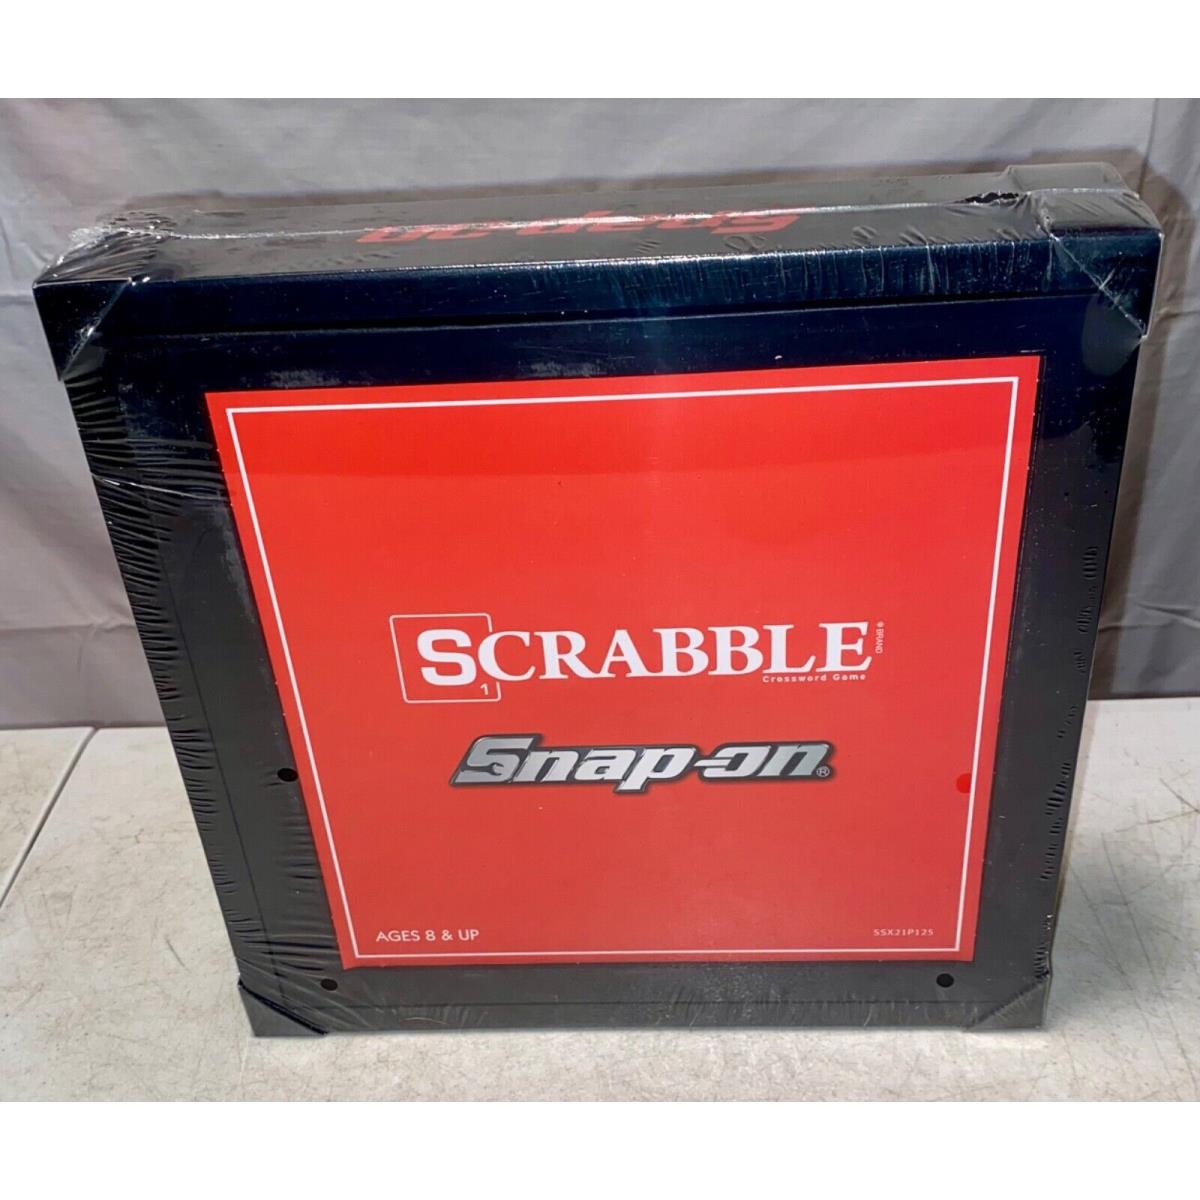 Snap-on Tools Edition Scrabble Board Game Hasbro Licensed Box